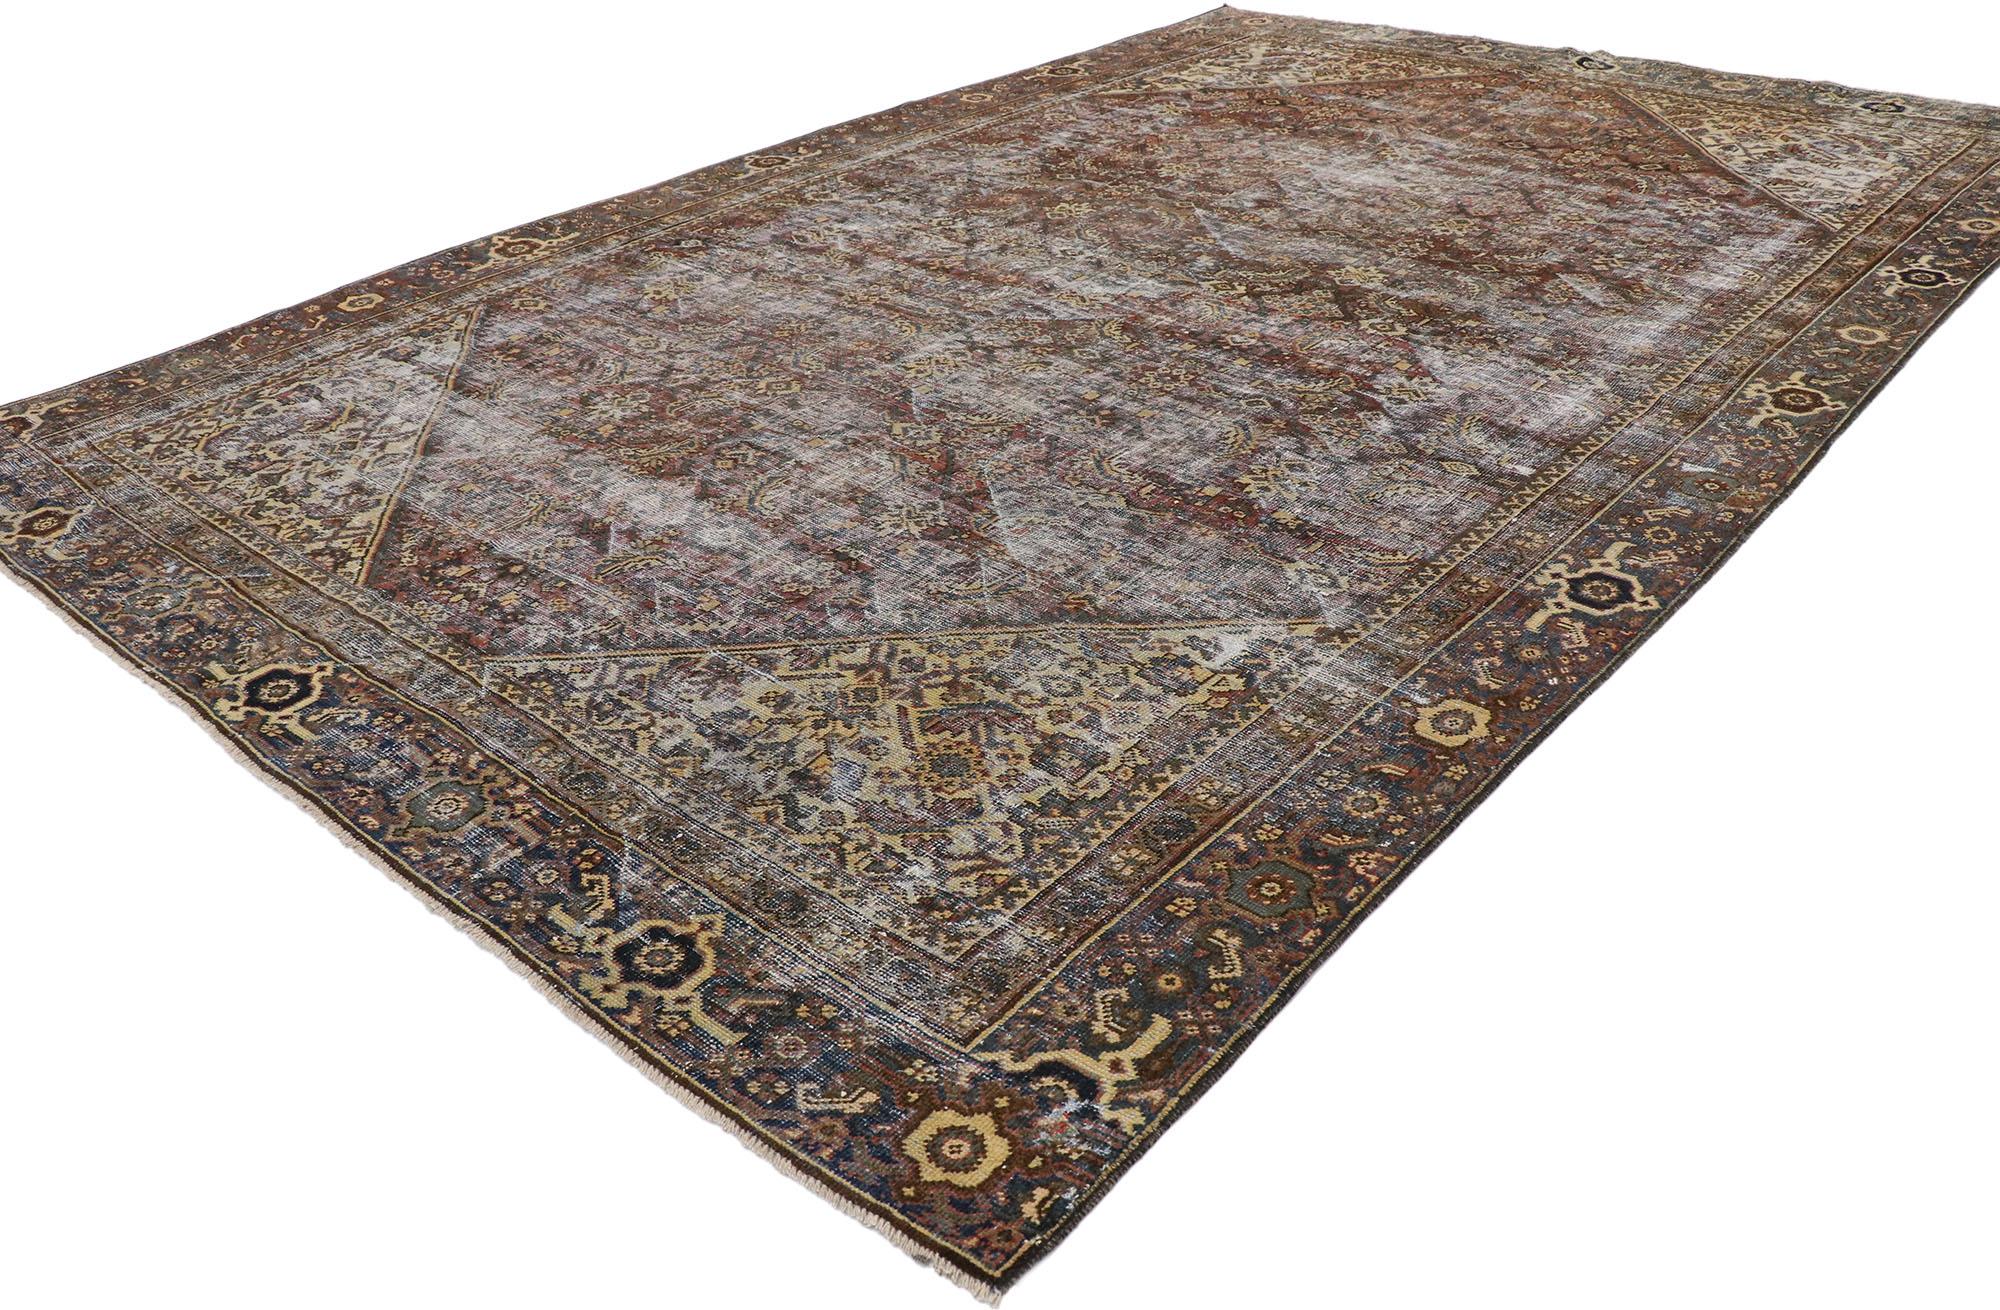 Wool  Distressed Antique Persian Mahal Rug with Traditional English Rustic Style 